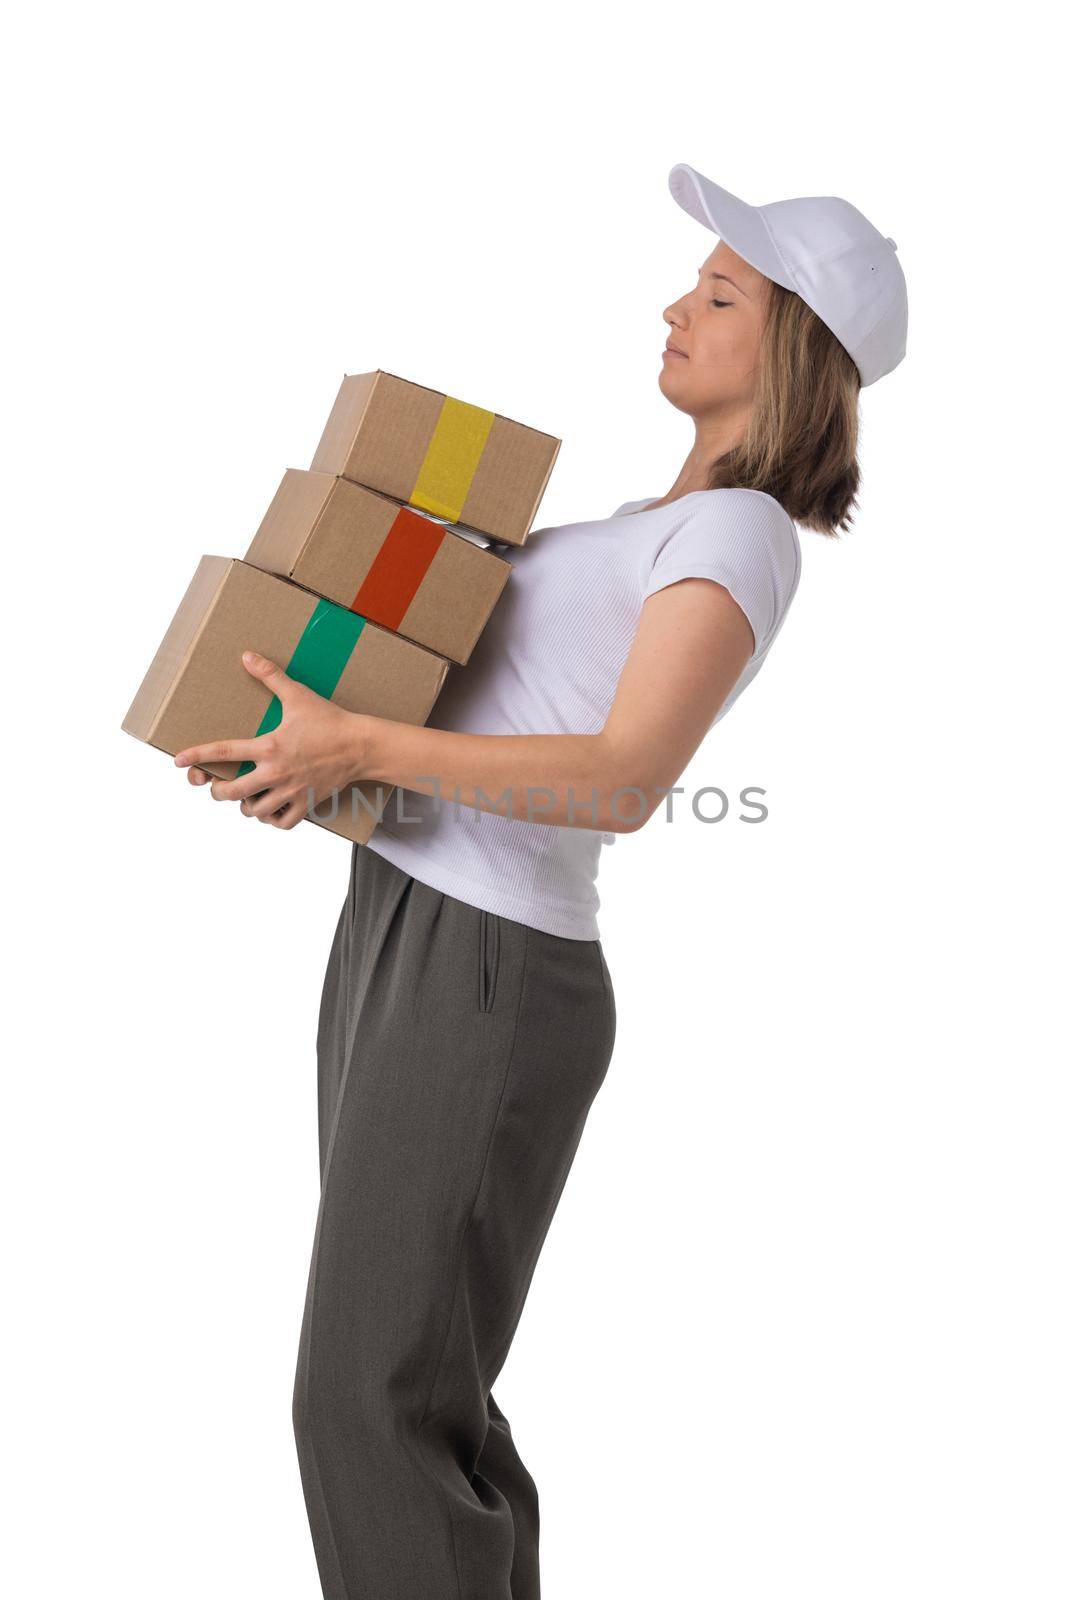 Young girl with cardboard boxes in hands isolated on white bakground, side view